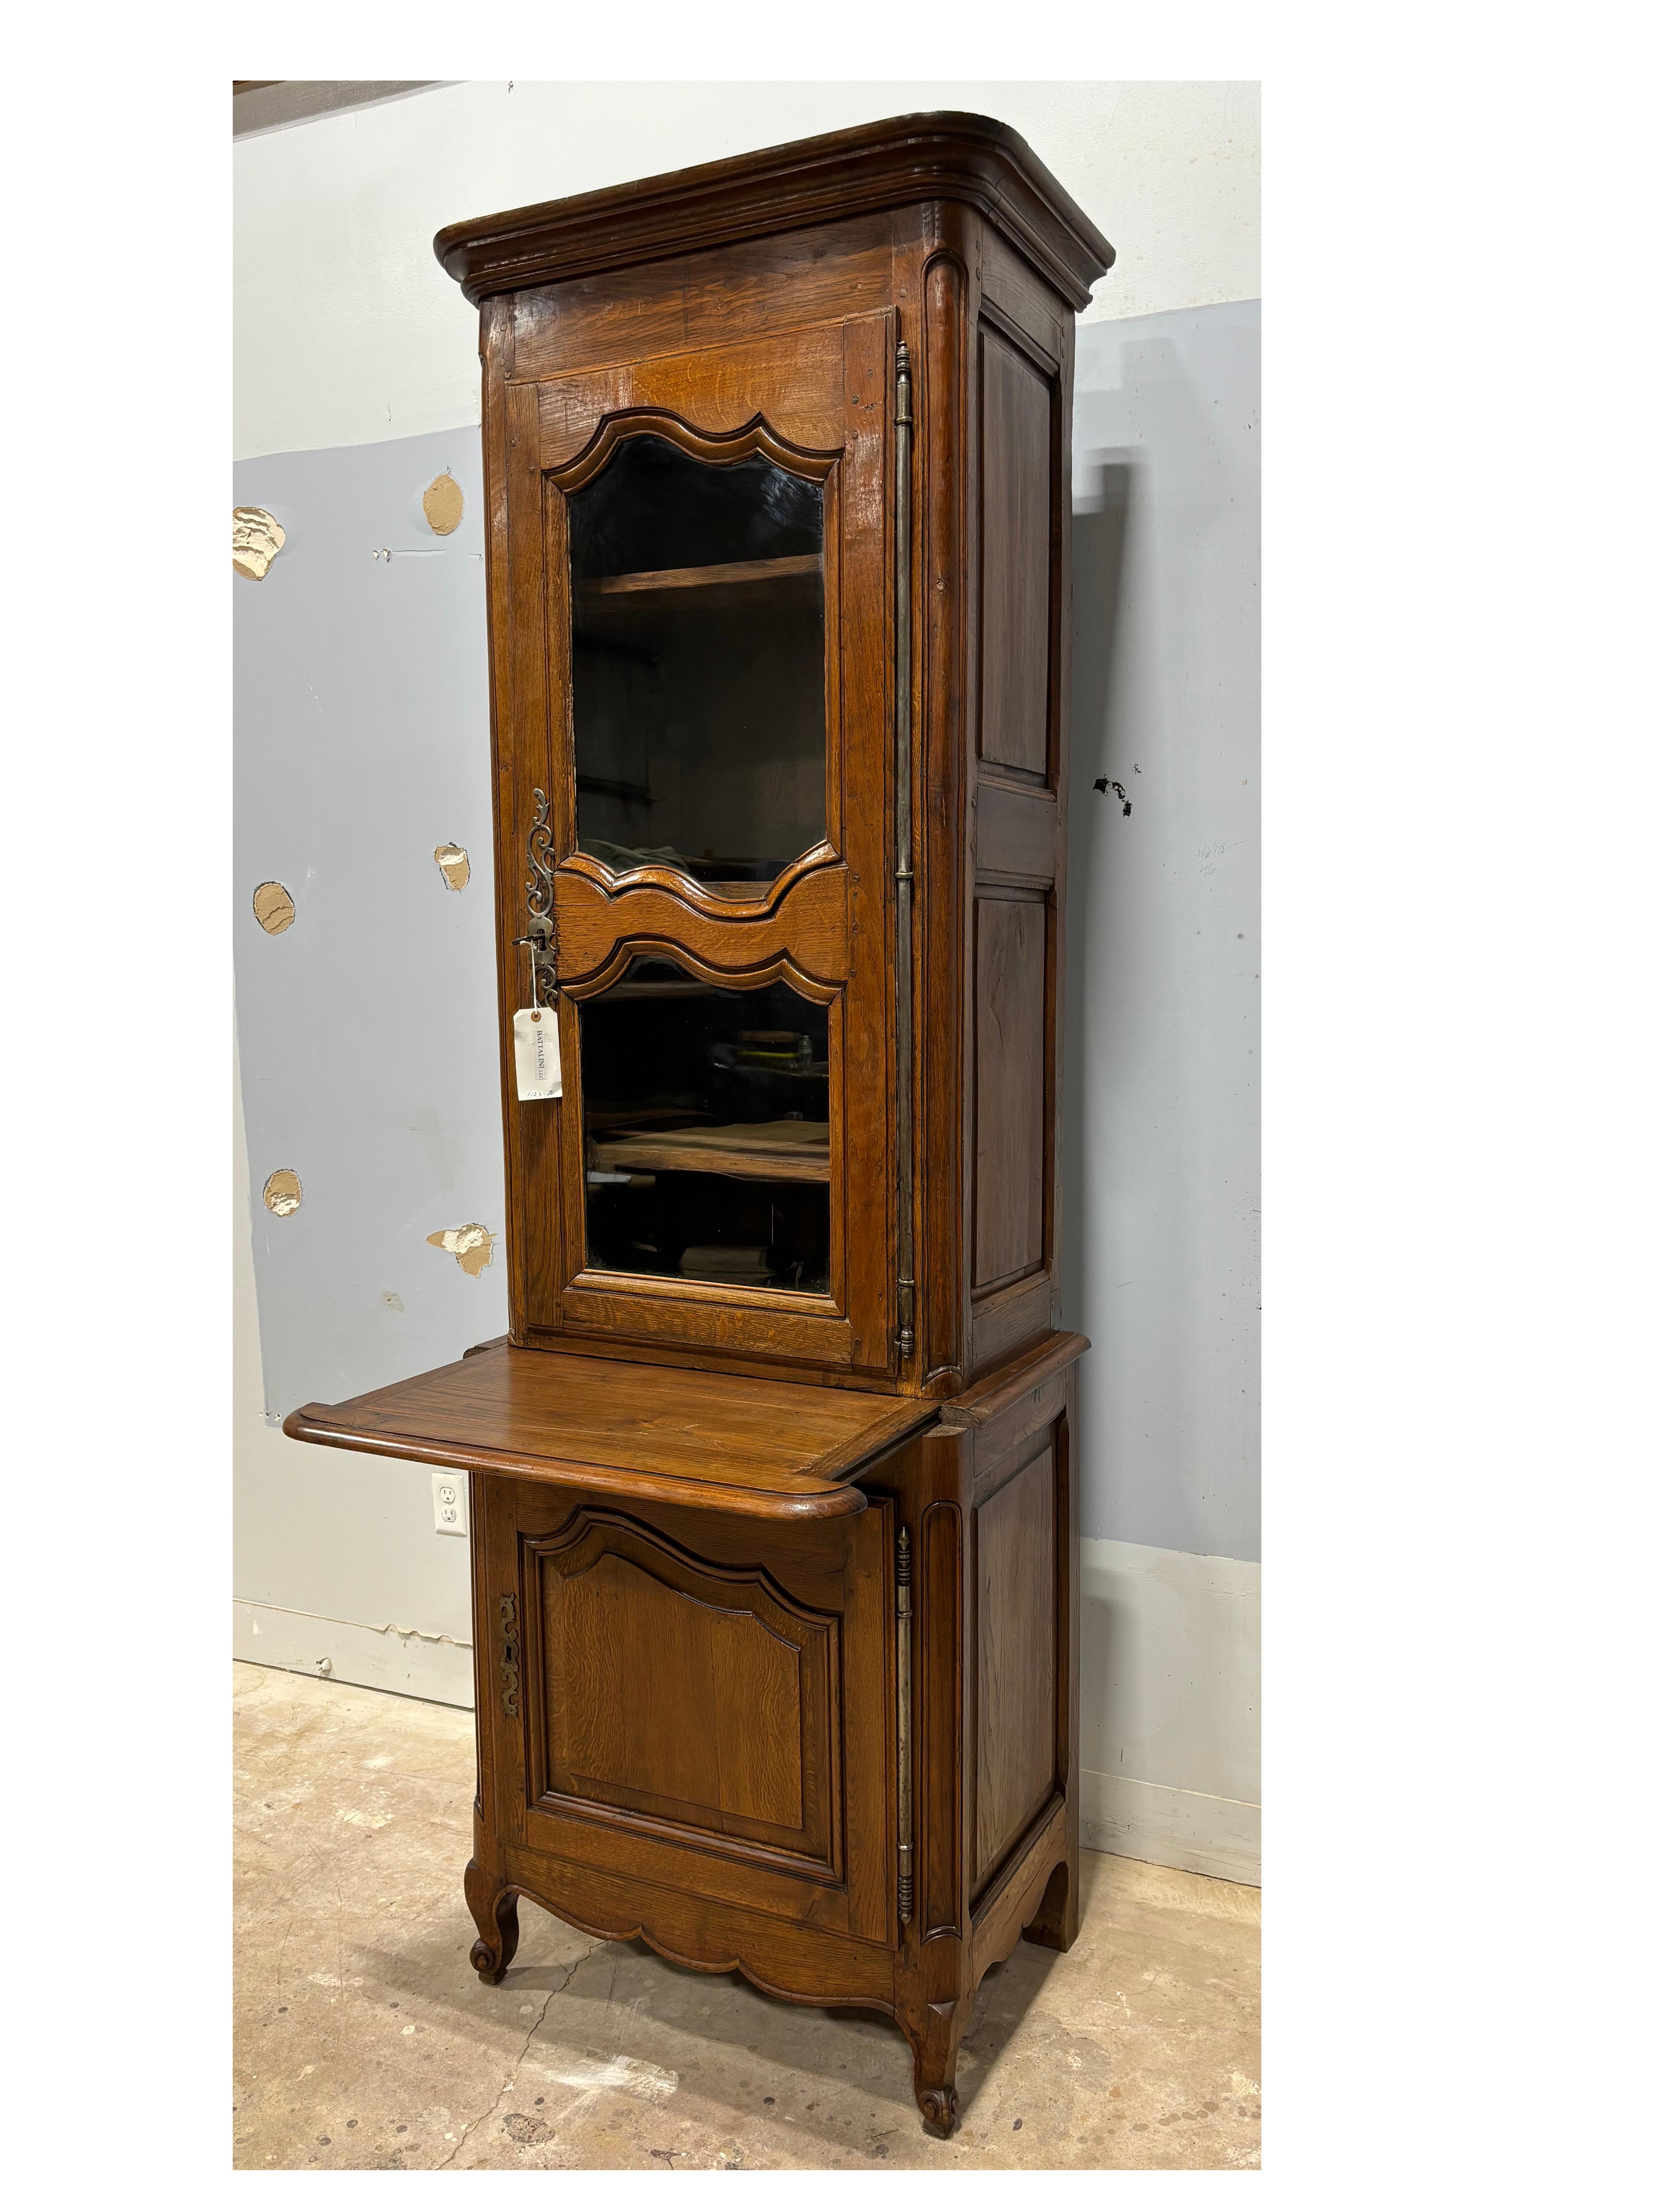 French 18th Century Cabinet In Good Condition For Sale In Stockbridge, GA